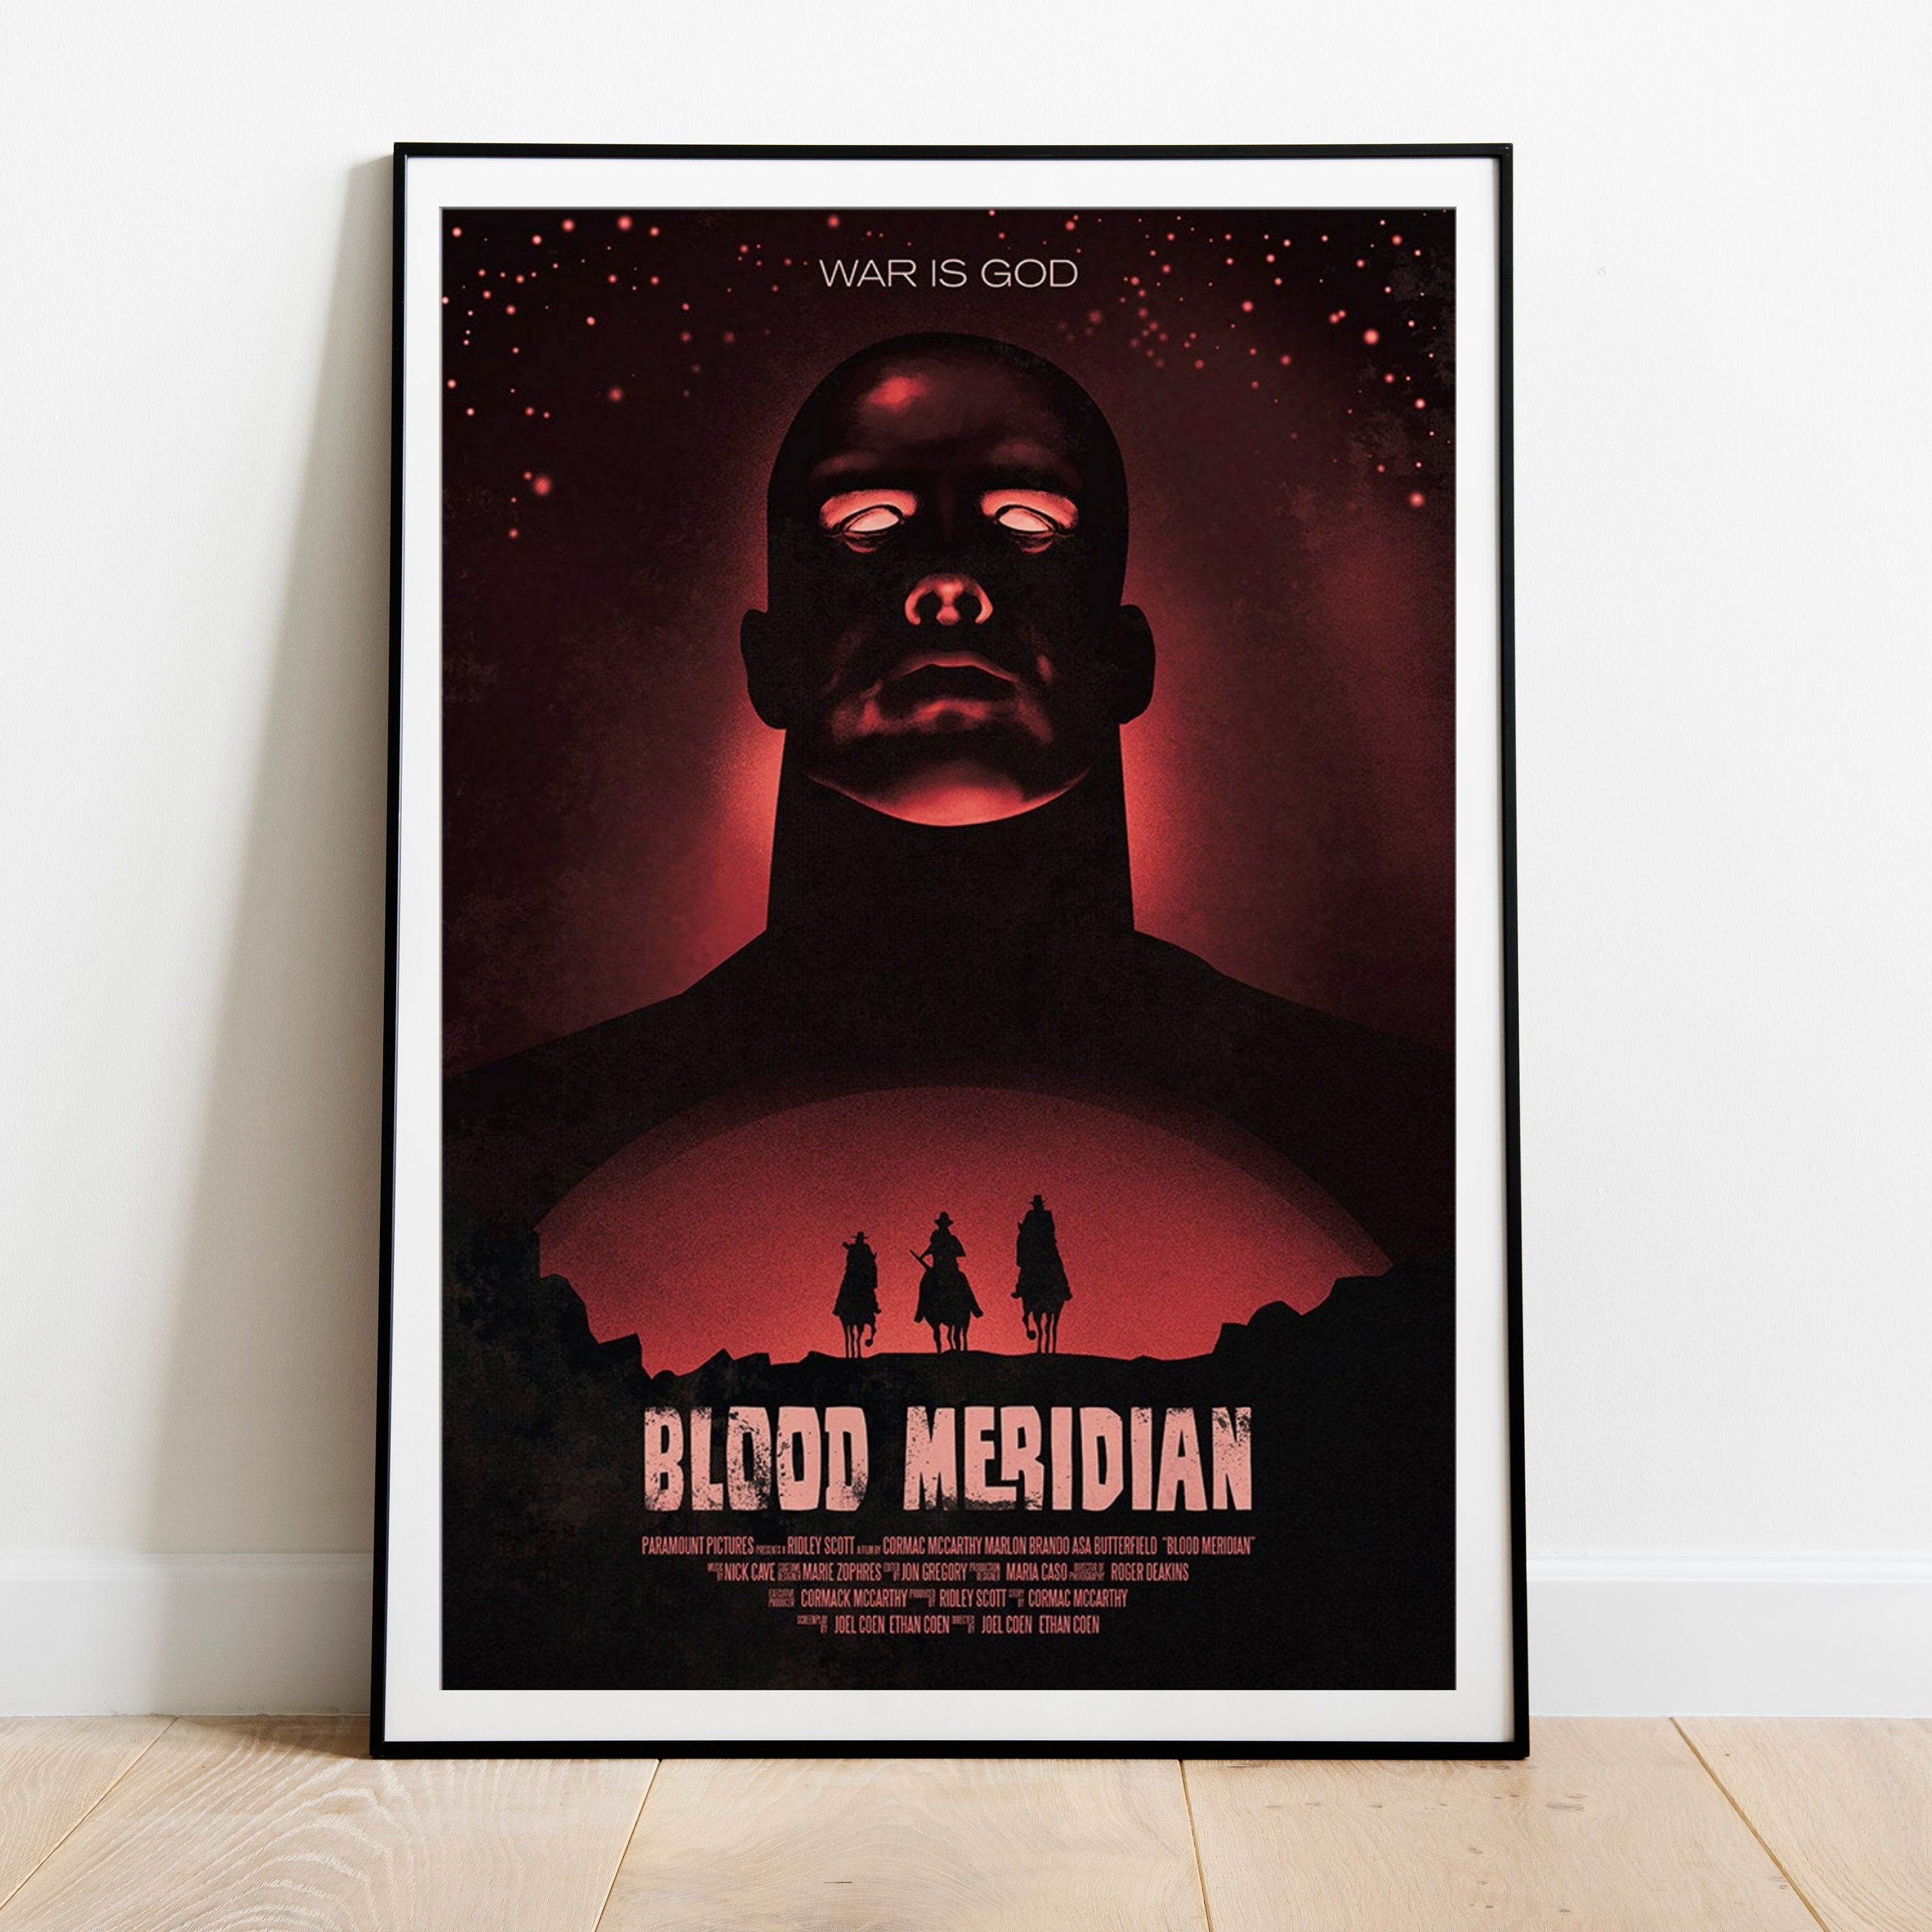 Blood Meridian Imaginary Movie Poster Art Print Condo Apartment Office Wall  Gothic Home Decor Literary Poster Gift 13x19 